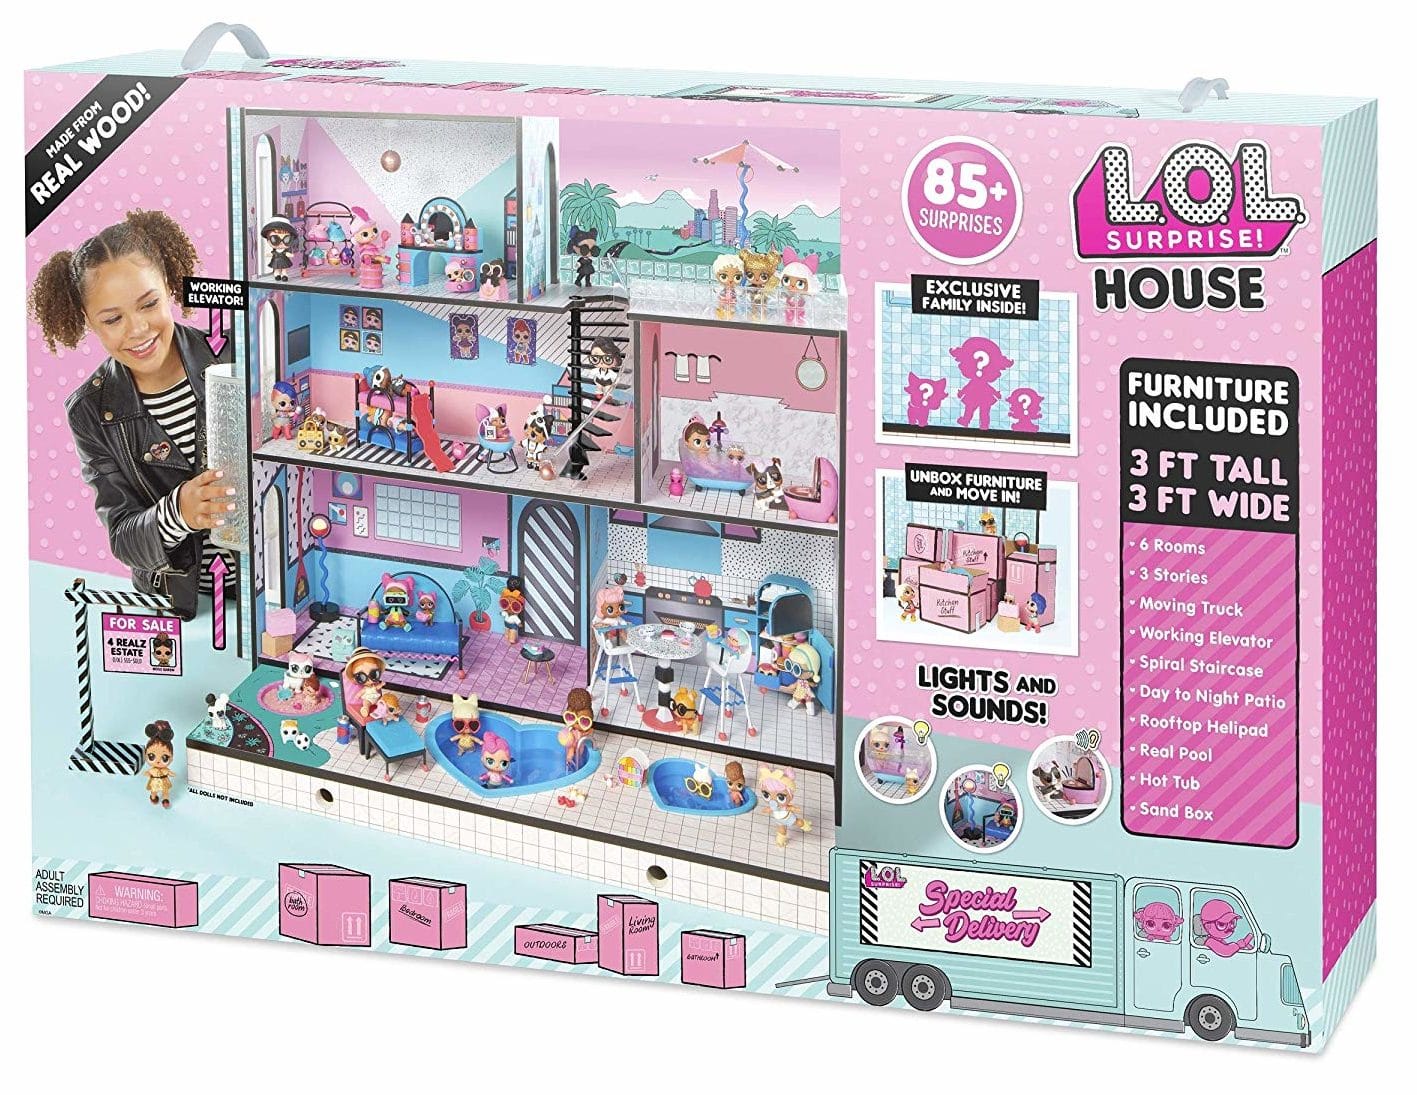 Where to Buy the L.O.L Surprise Doll House 2018